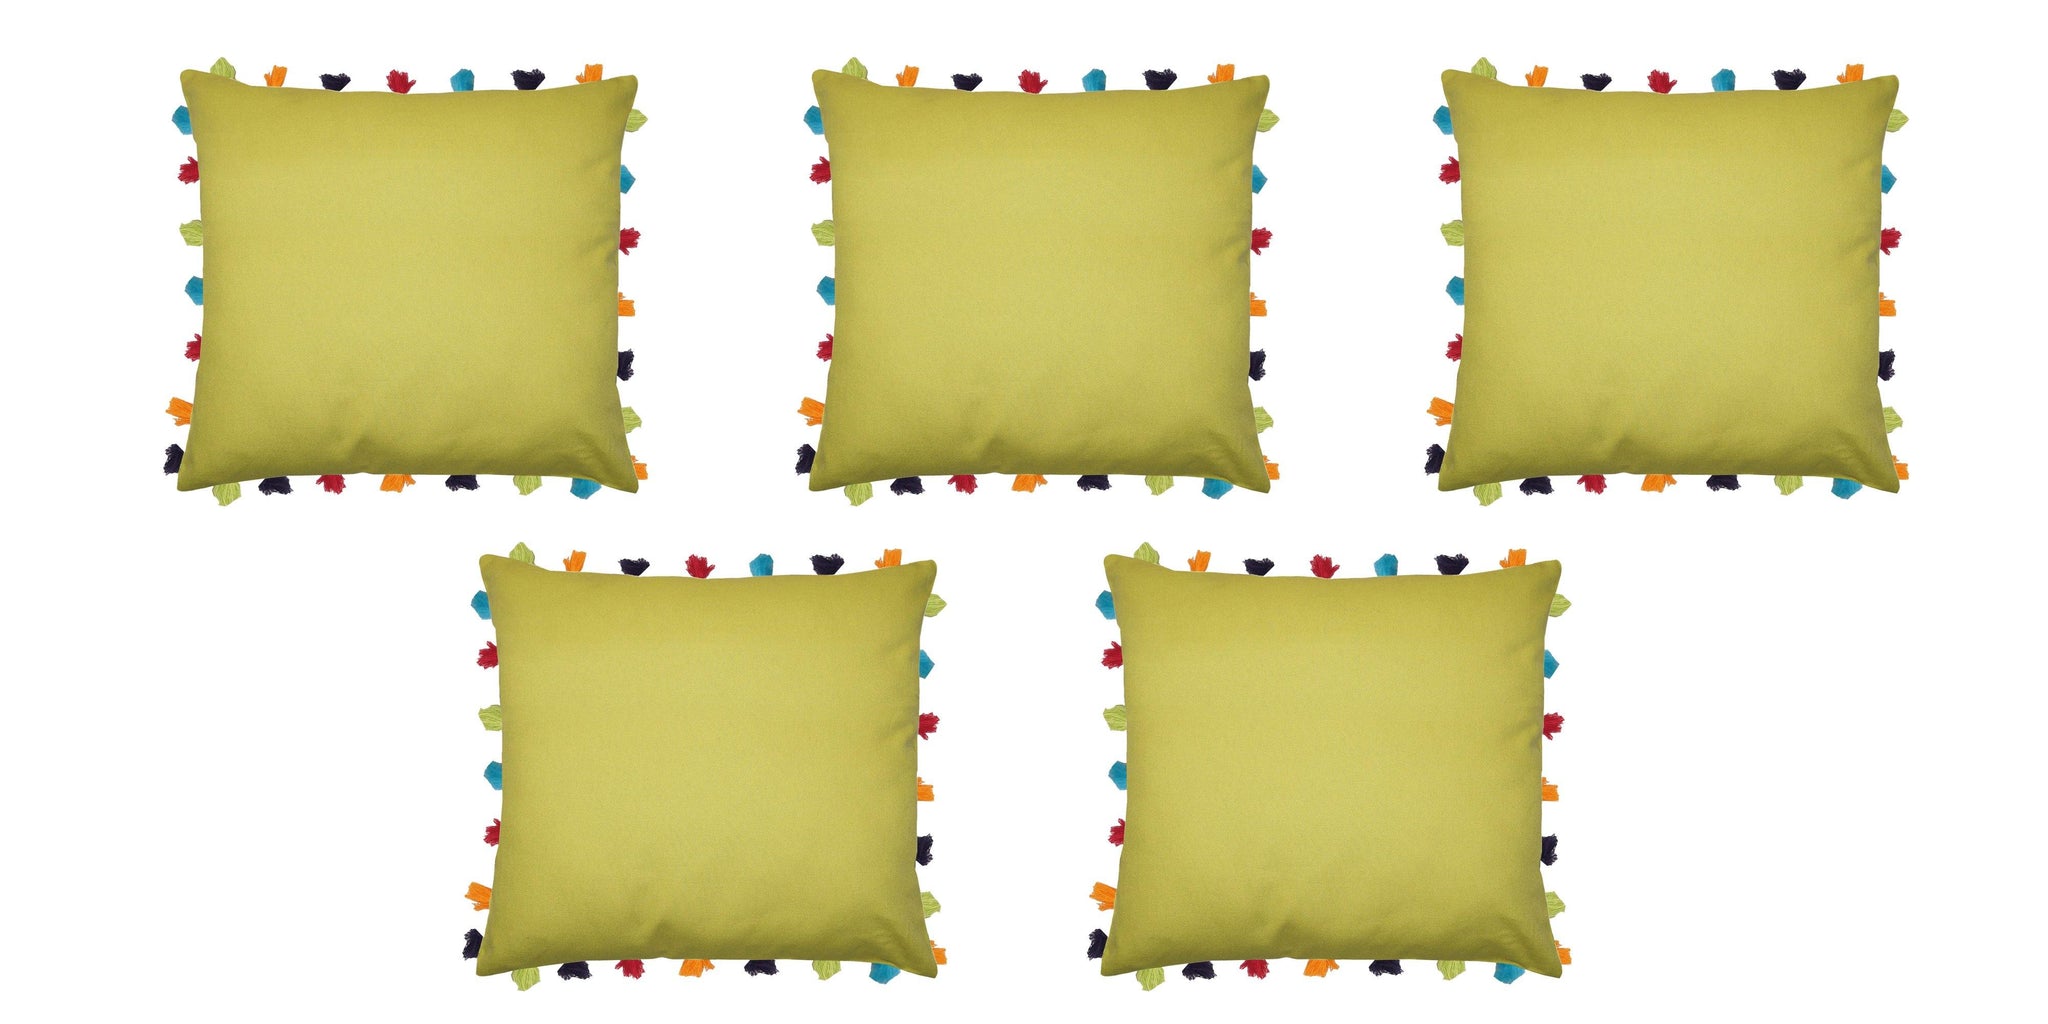 Lushomes Palm Cushion Cover with Colorful tassels (5 pcs, 20 x 20”) - Lushomes